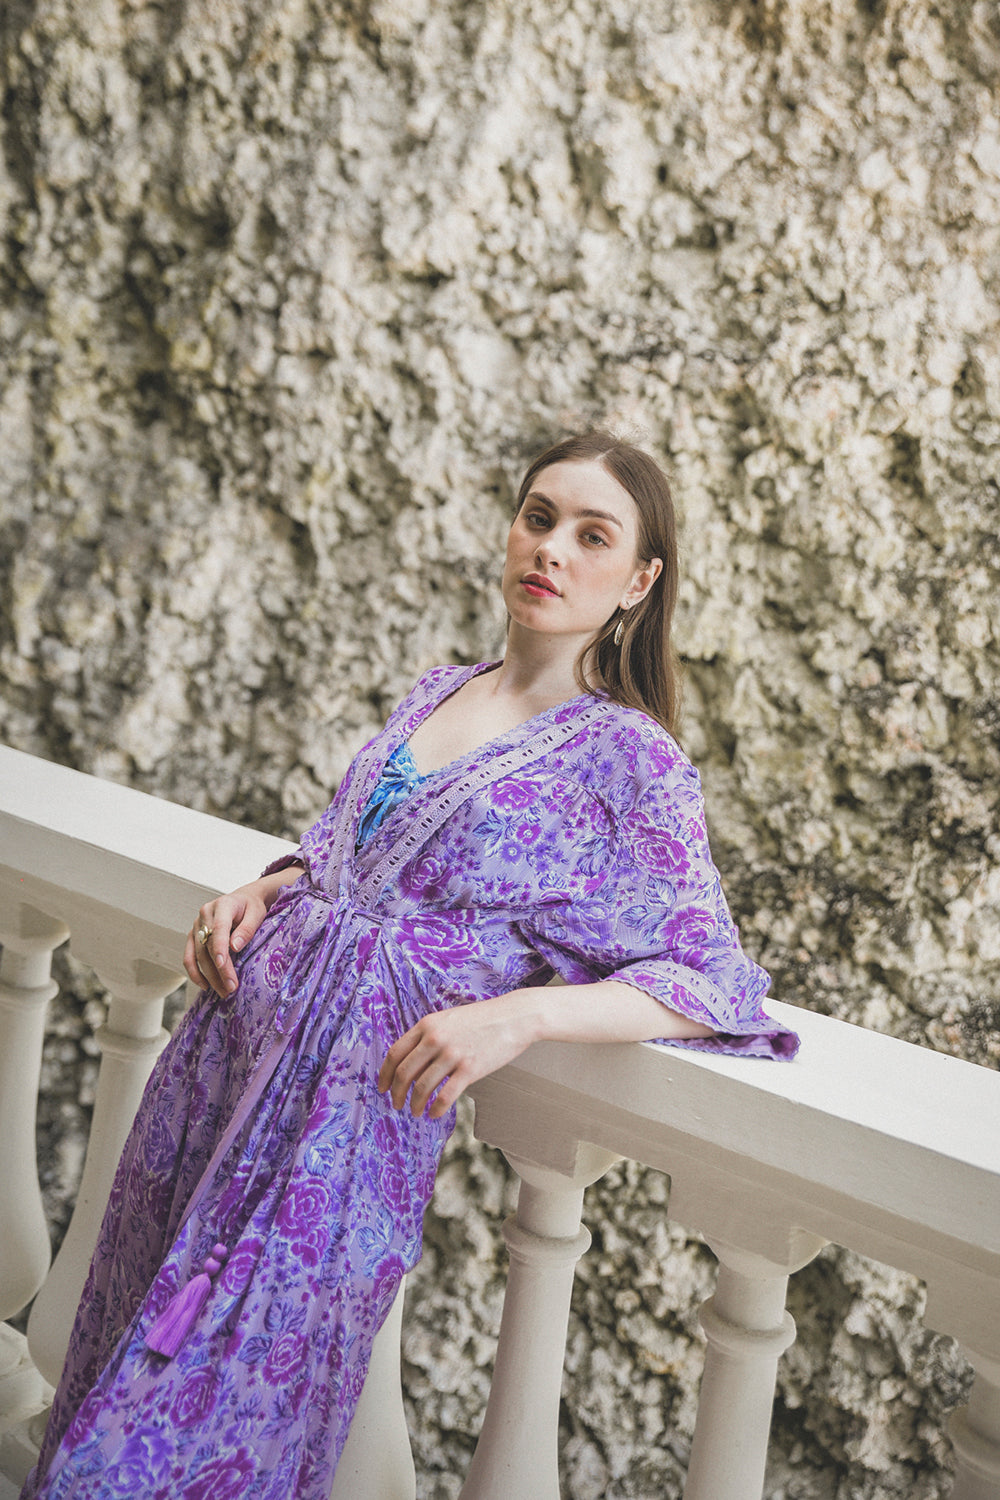 Wrap yourself in elegance with the Peony Long Robe, a modern boho kimono designed by Tulle and Batiste and ethically handmade by Balinese artisans